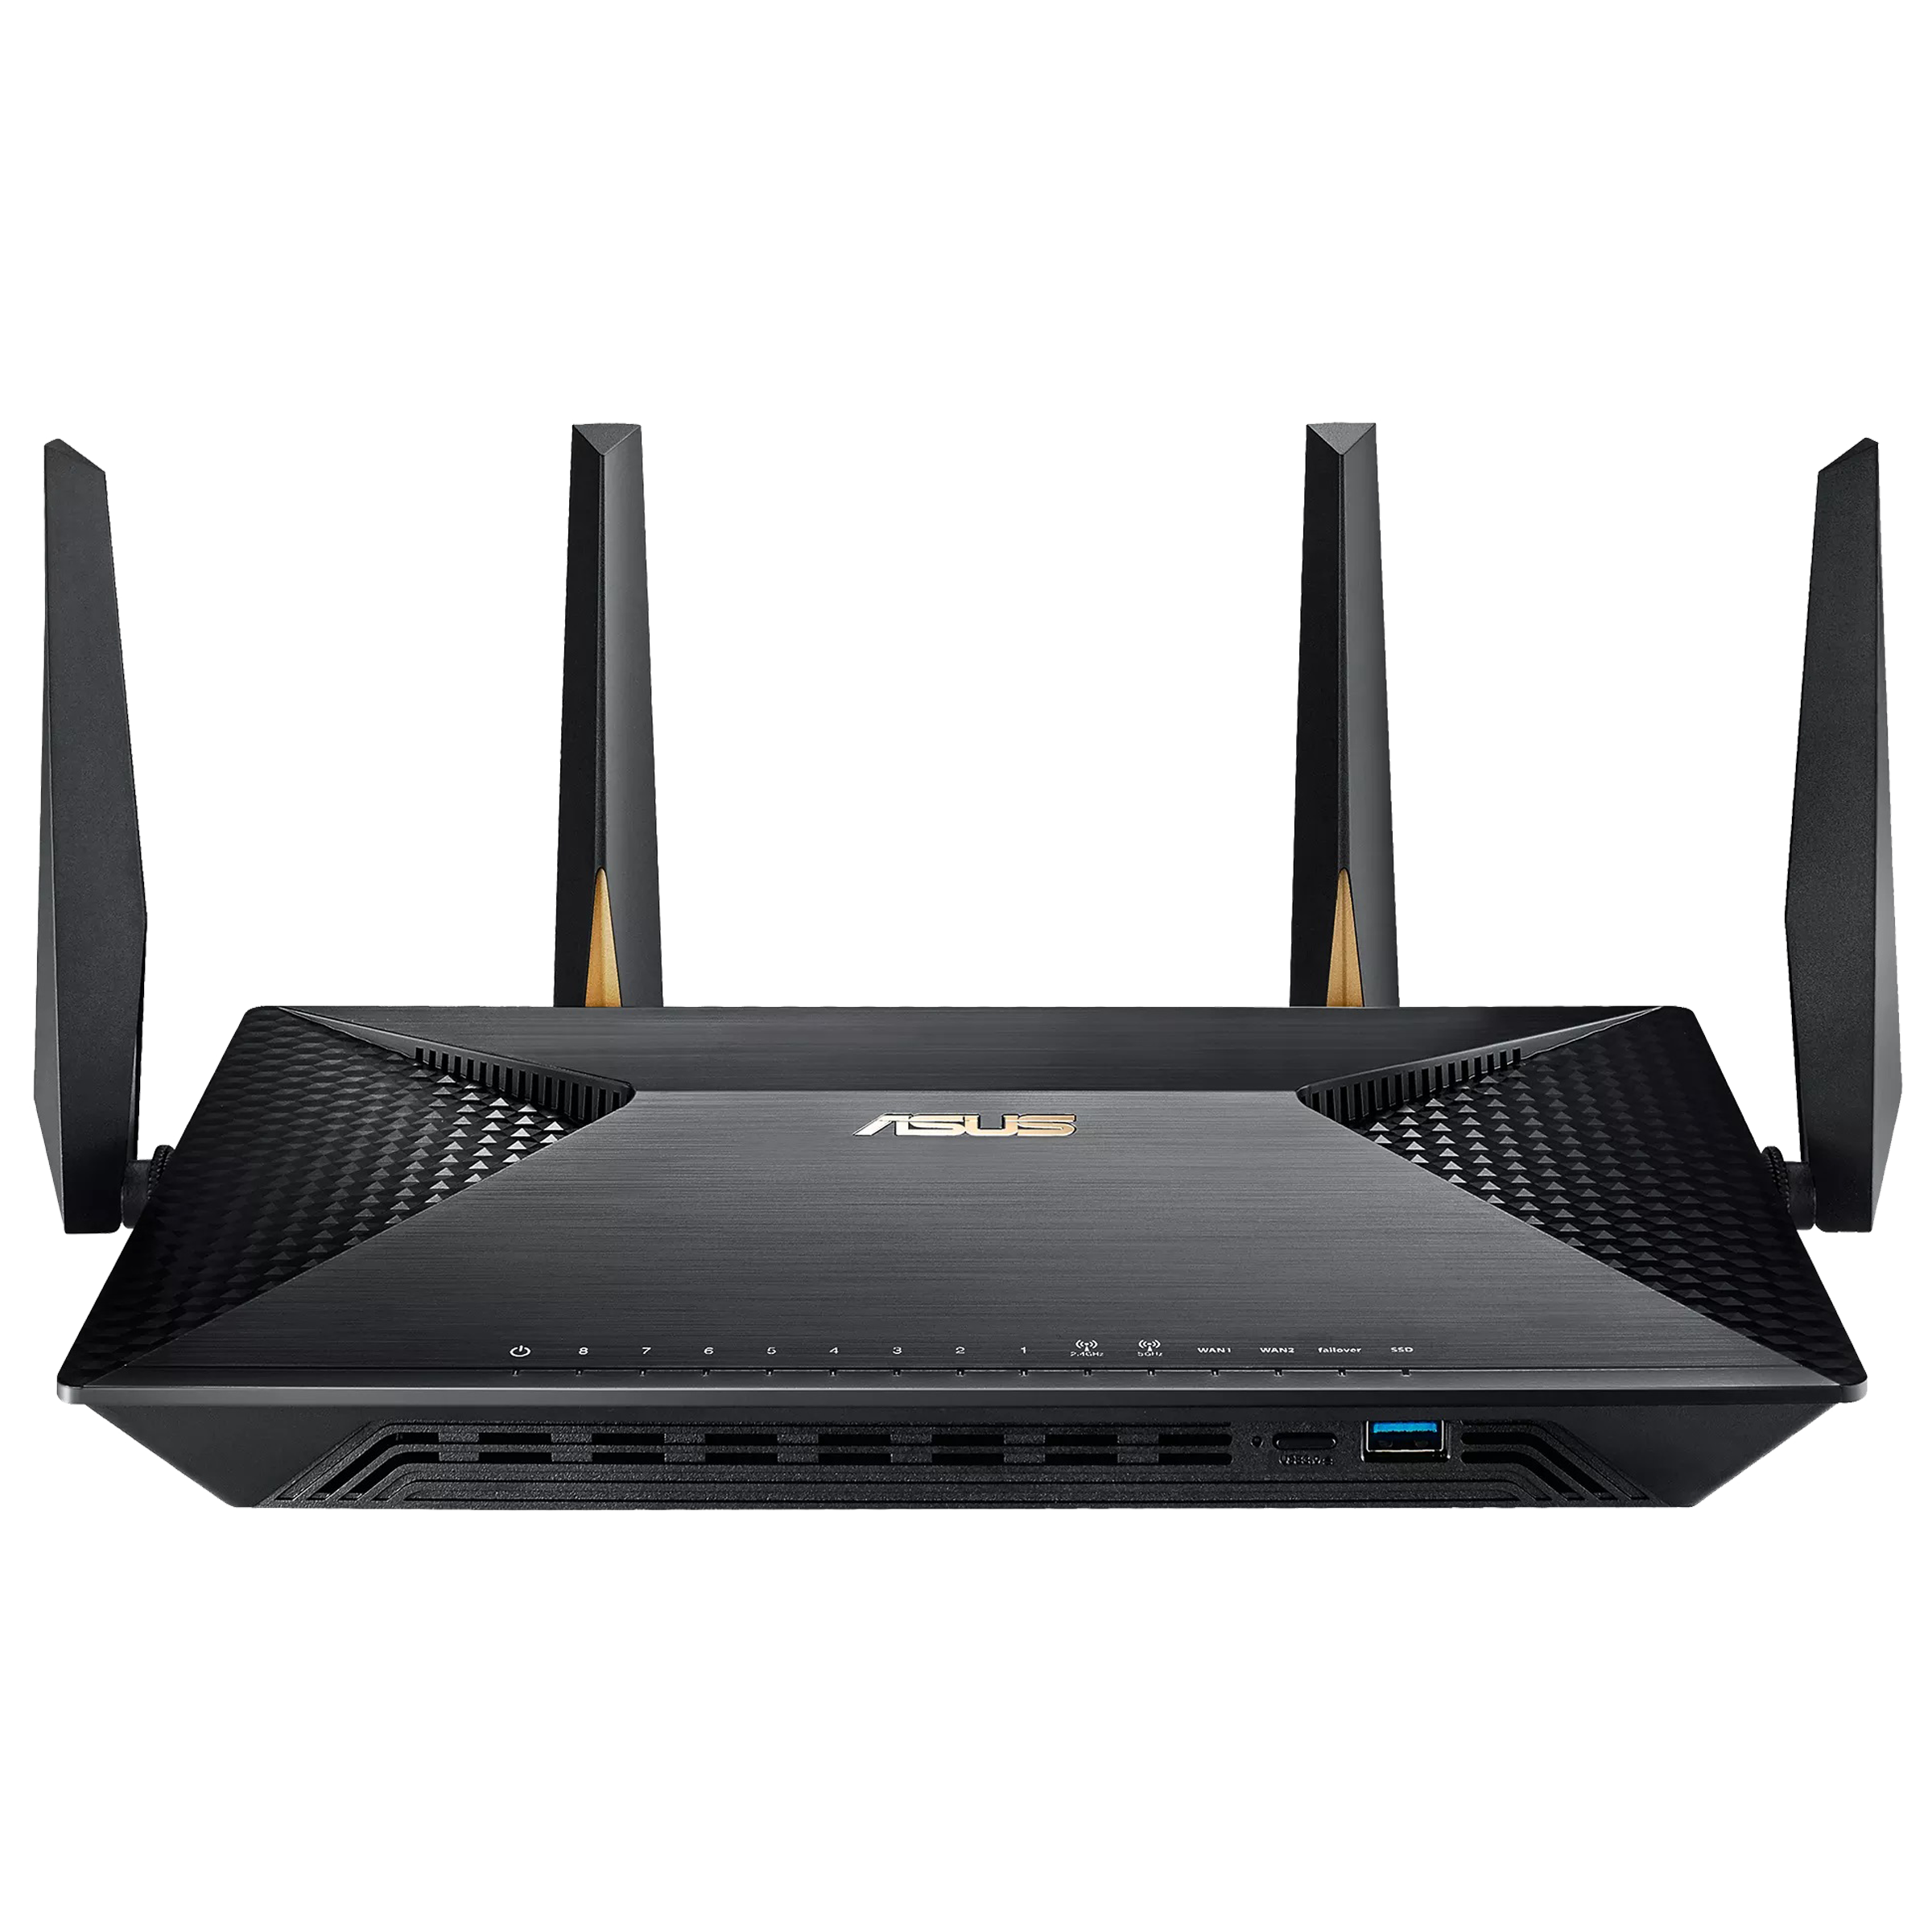 Asus BRT-AC828 Dual Band 2 Gbps WiFi Router (4 Antennas, 8 LAN Ports, AiProtection Pro, Black)_1